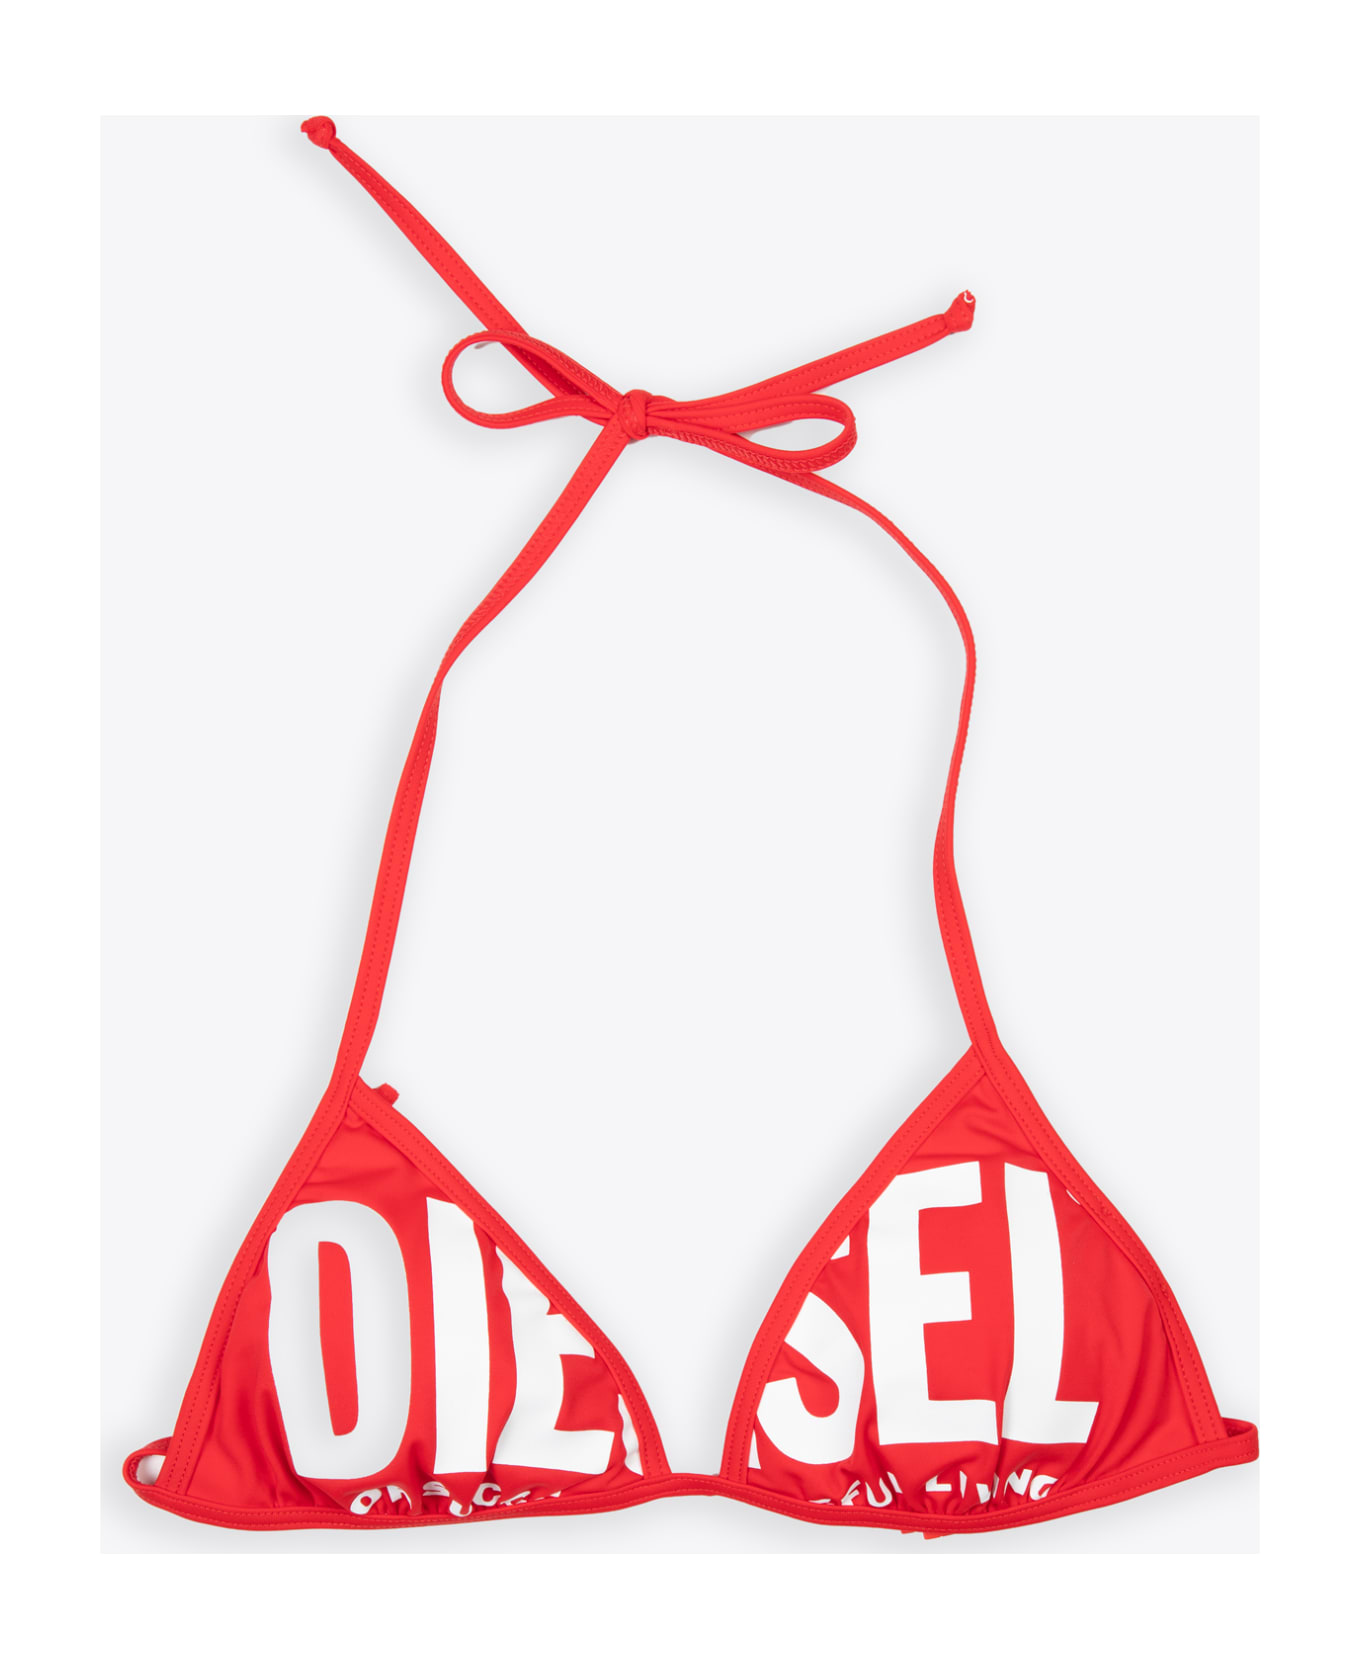 Diesel Bfb-sees Red Lycra Swim Bikini Top With Logo - Bfb Sees - RED/white